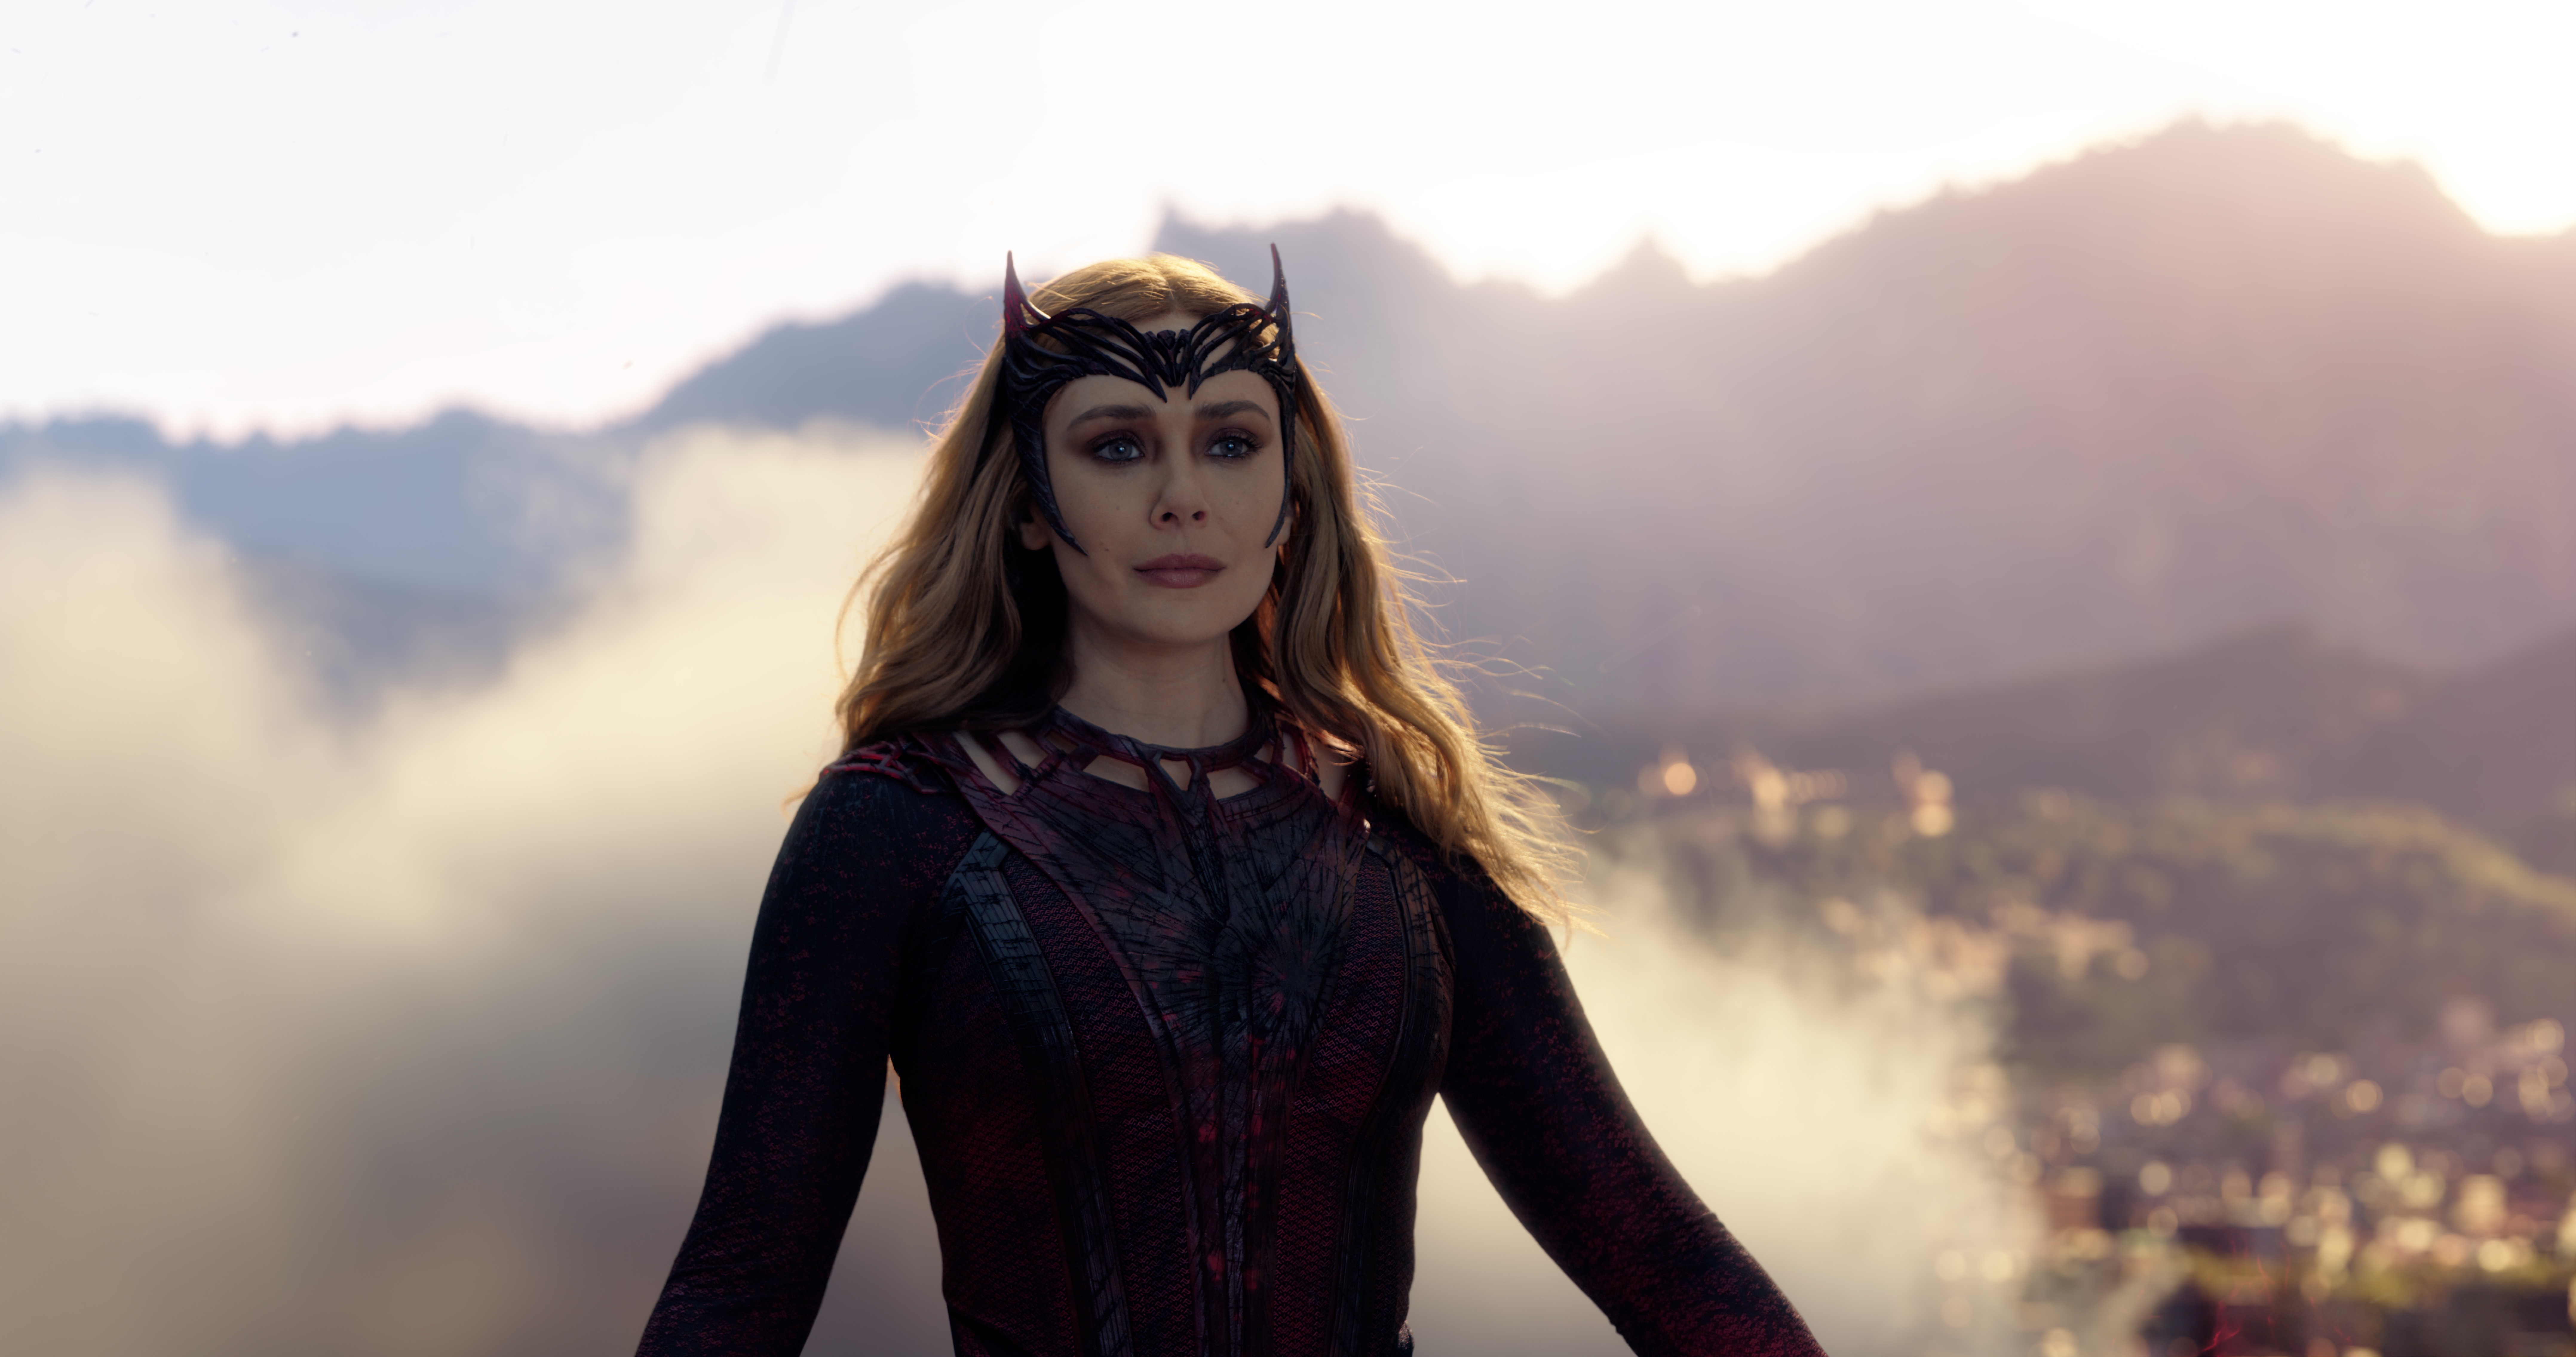 Scarlet Witch stares accusingly at someone off screen.